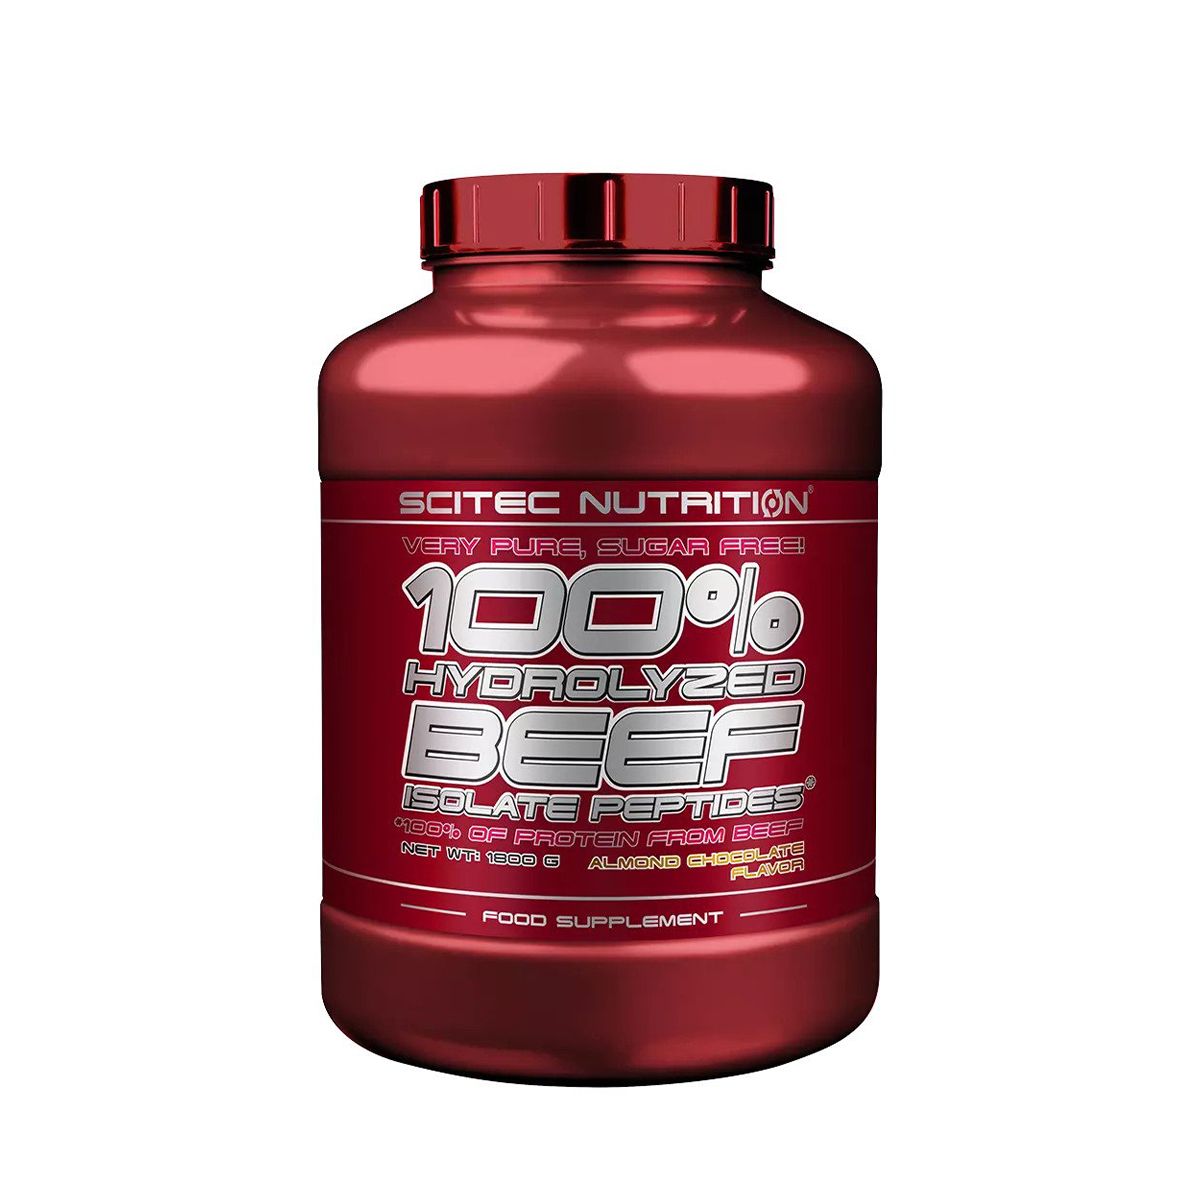 SCITEC NUTRITION - 100% HYDROLYZED BEEF ISOLATE PEPTIDES - 1800 G